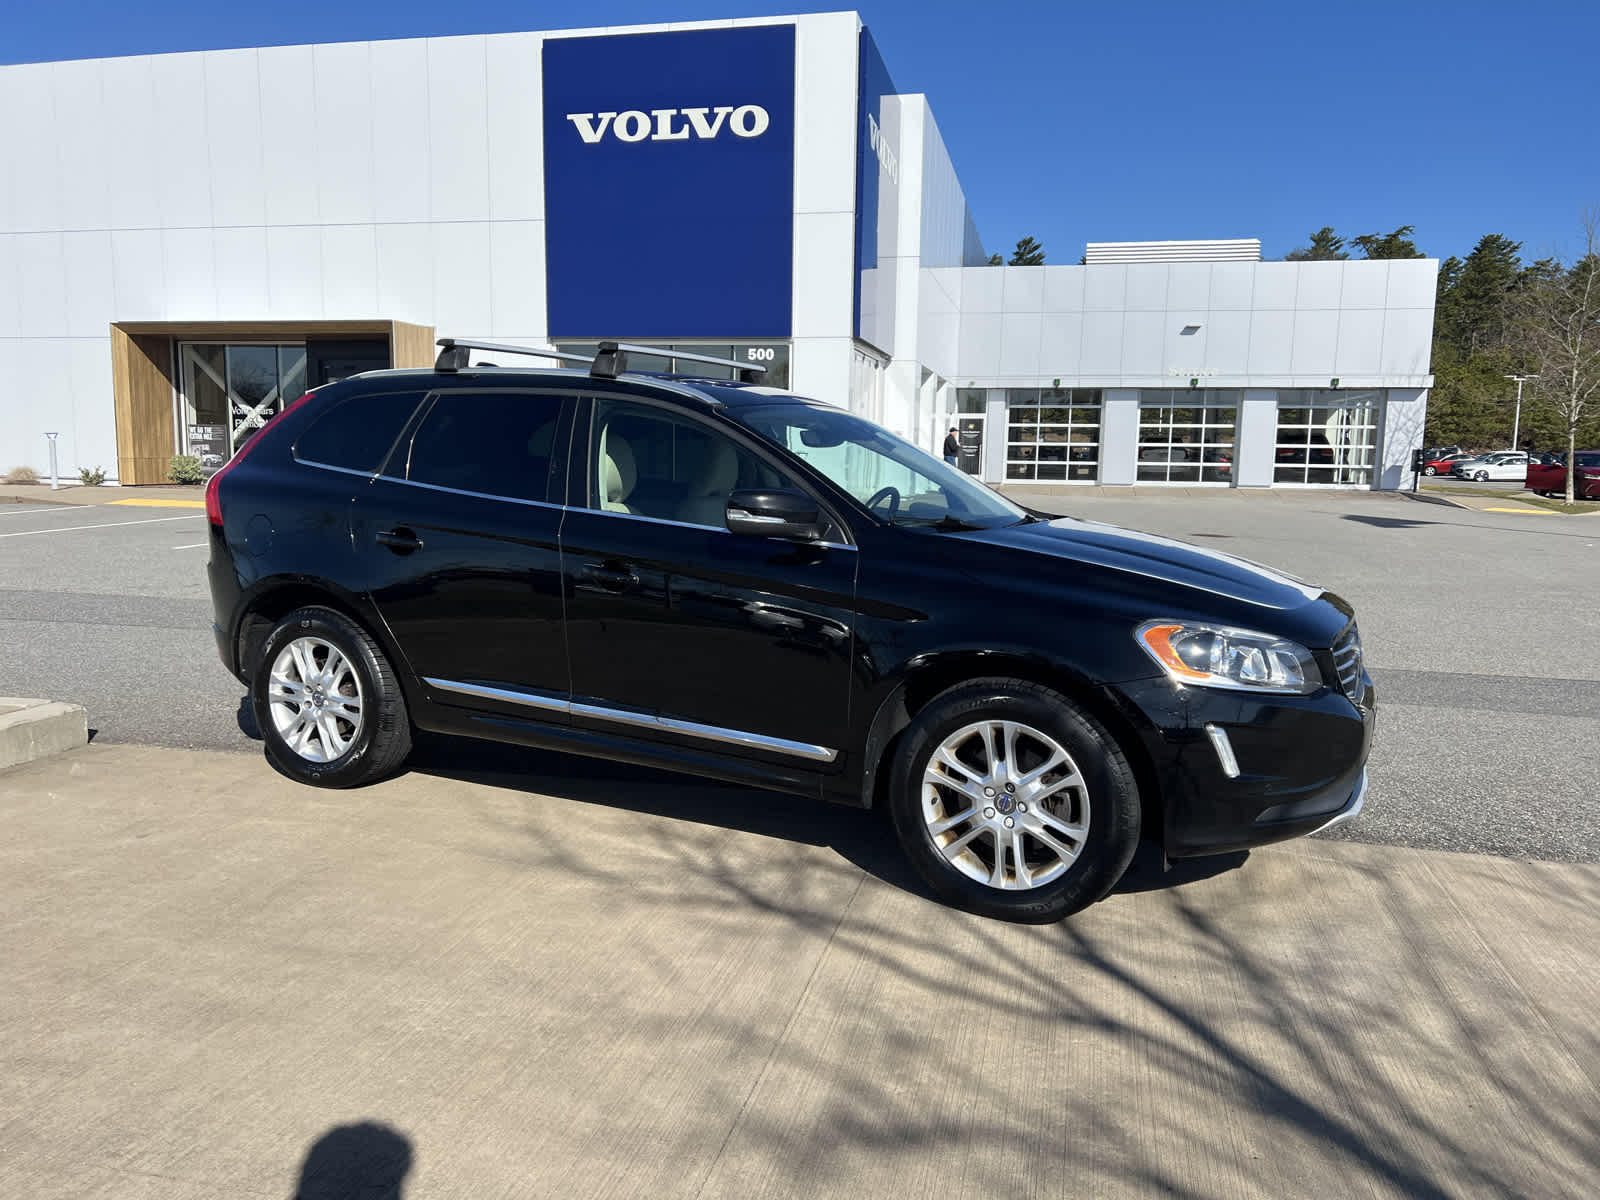 Used 2016 Volvo XC60 Premier with VIN YV4612RK0G2854151 for sale in Plymouth, MA